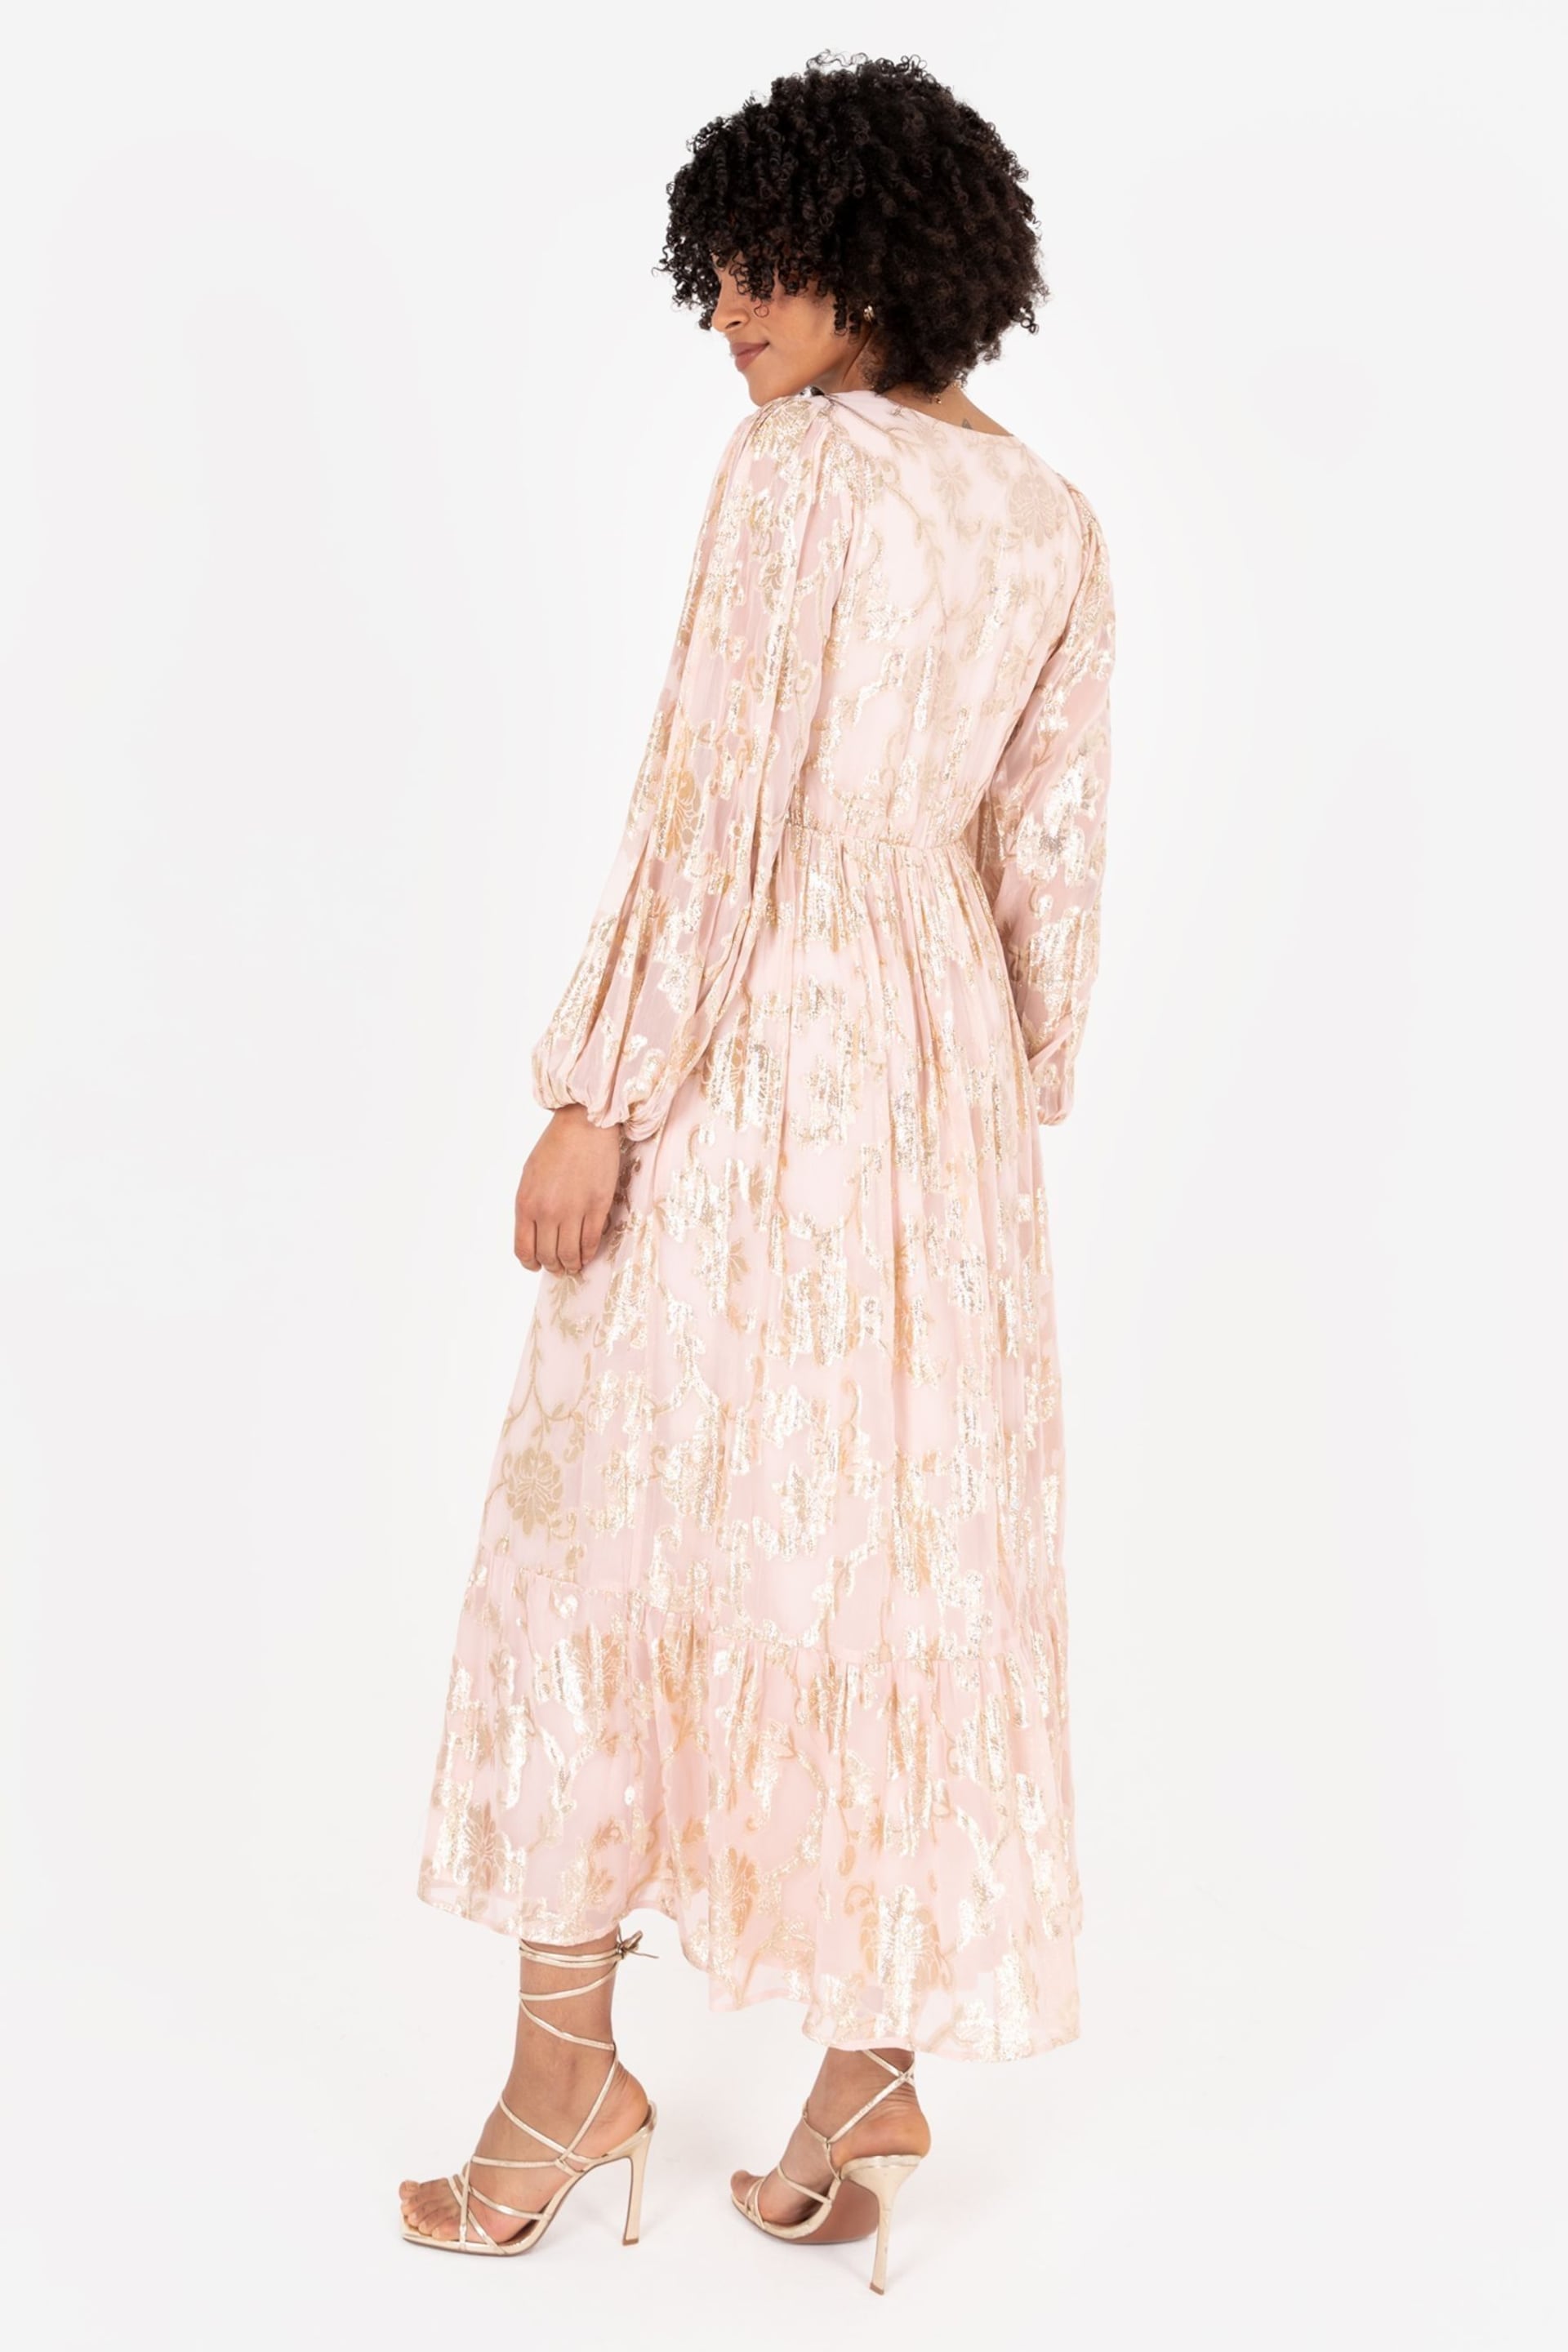 Lovedrobe Nude Long Sleeve Foiled Wrap Front Midaxi Dress - Image 6 of 6